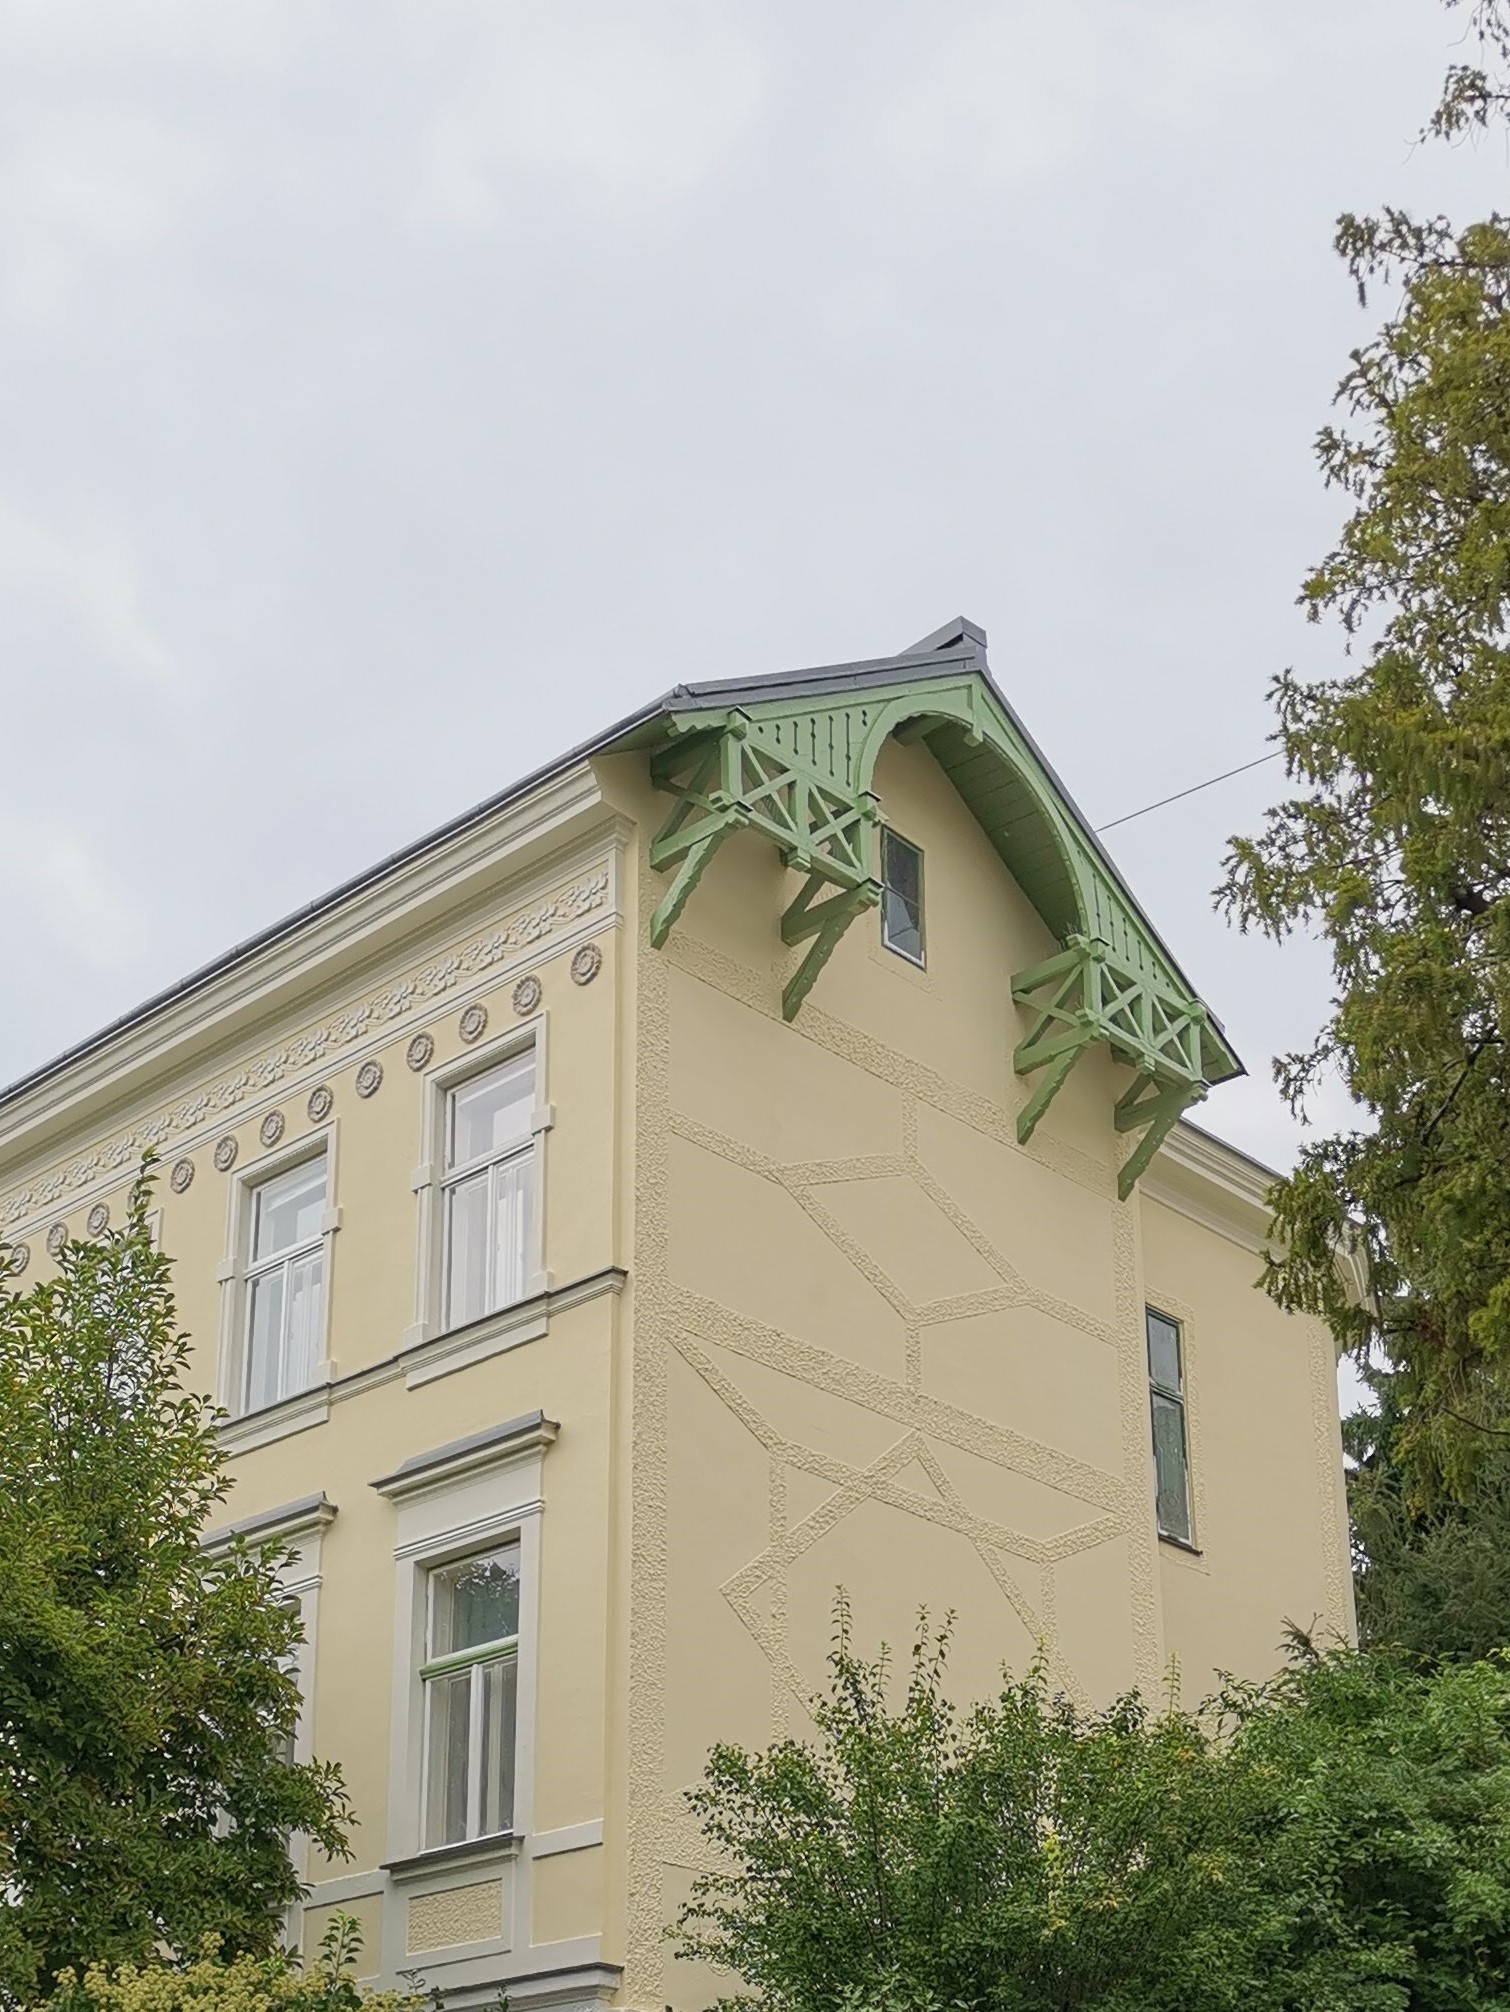 Partial view of a yellow painted house exterior with decorative wooden eaves painted pale green